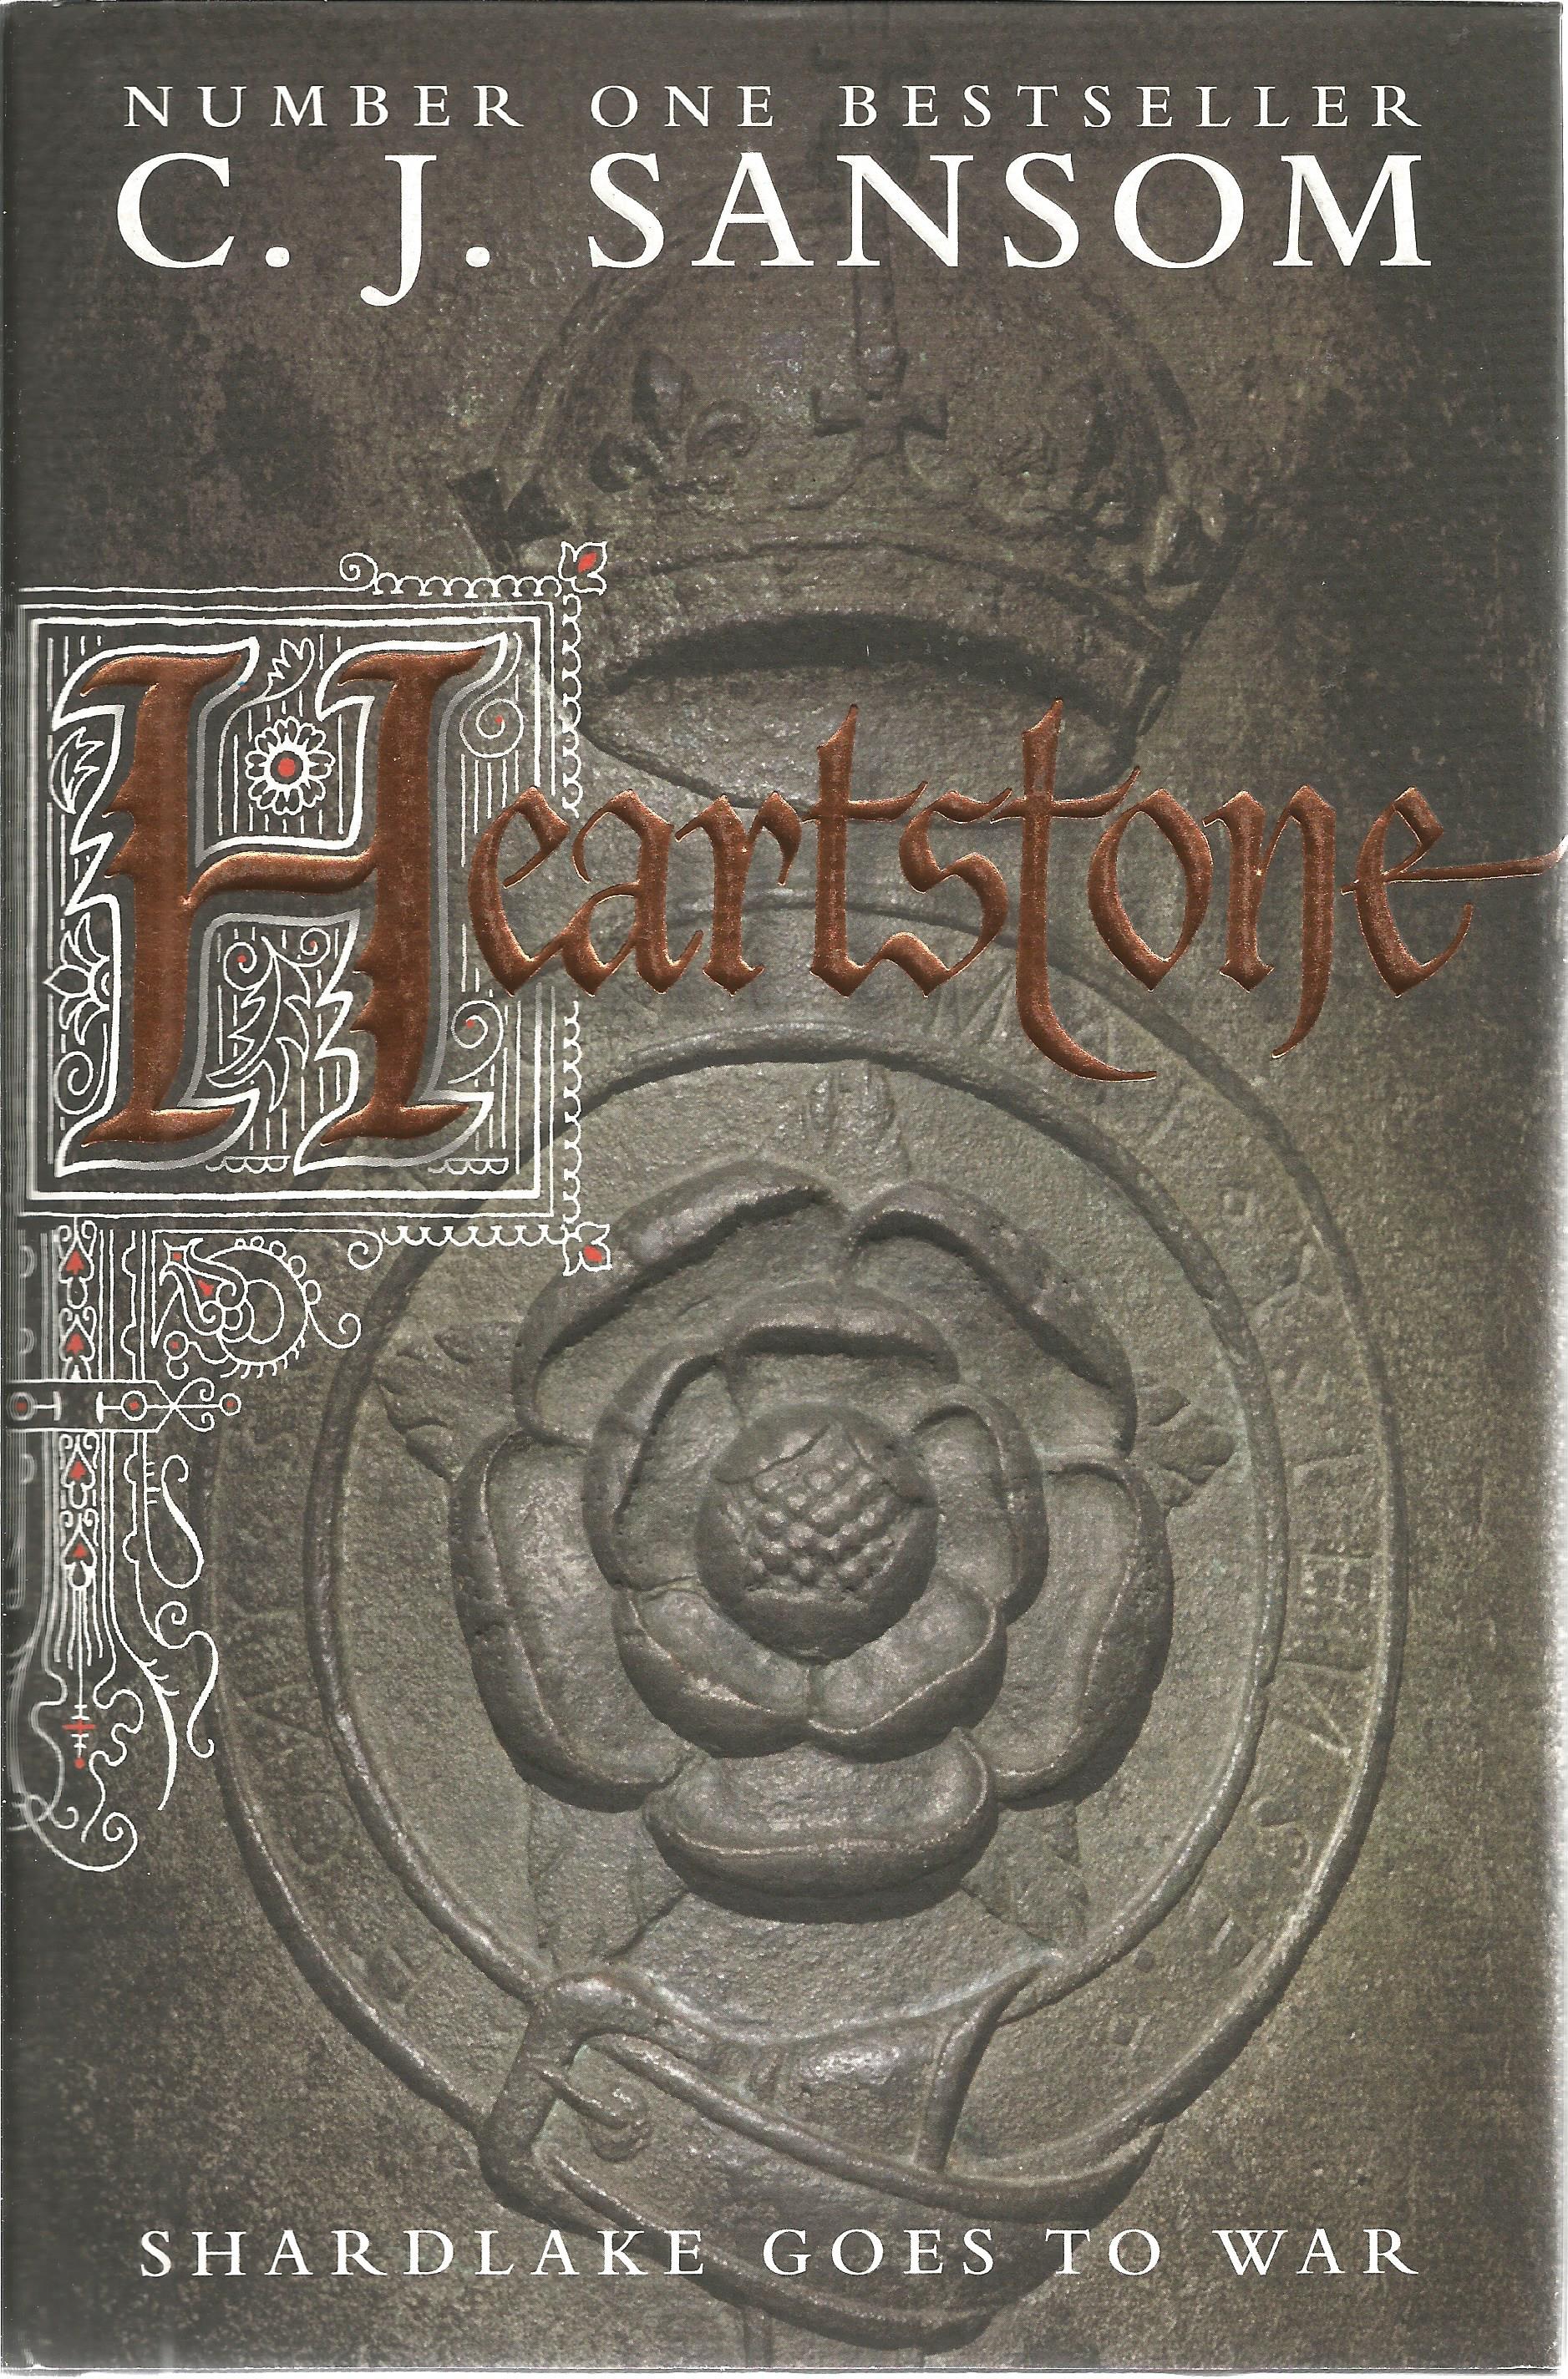 Heartstone hardback book by C. J. Sansom. In good condition with dust jacket. Published 2010. 633